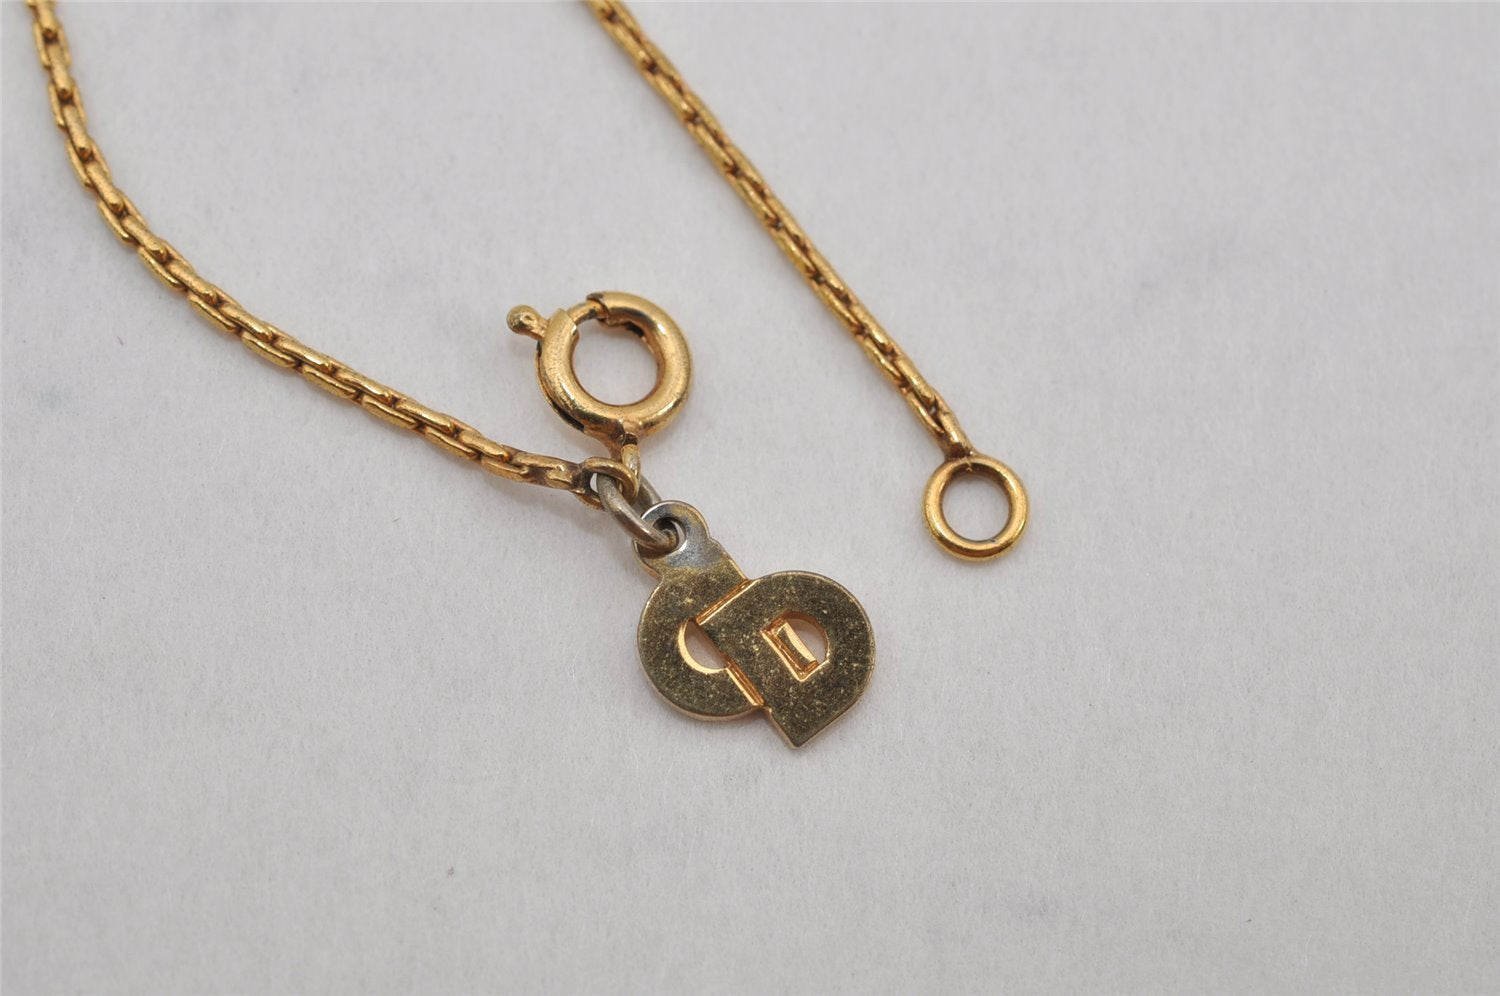 Authentic Christian Dior Gold Tone Chain Pendant Necklace CD 0474K